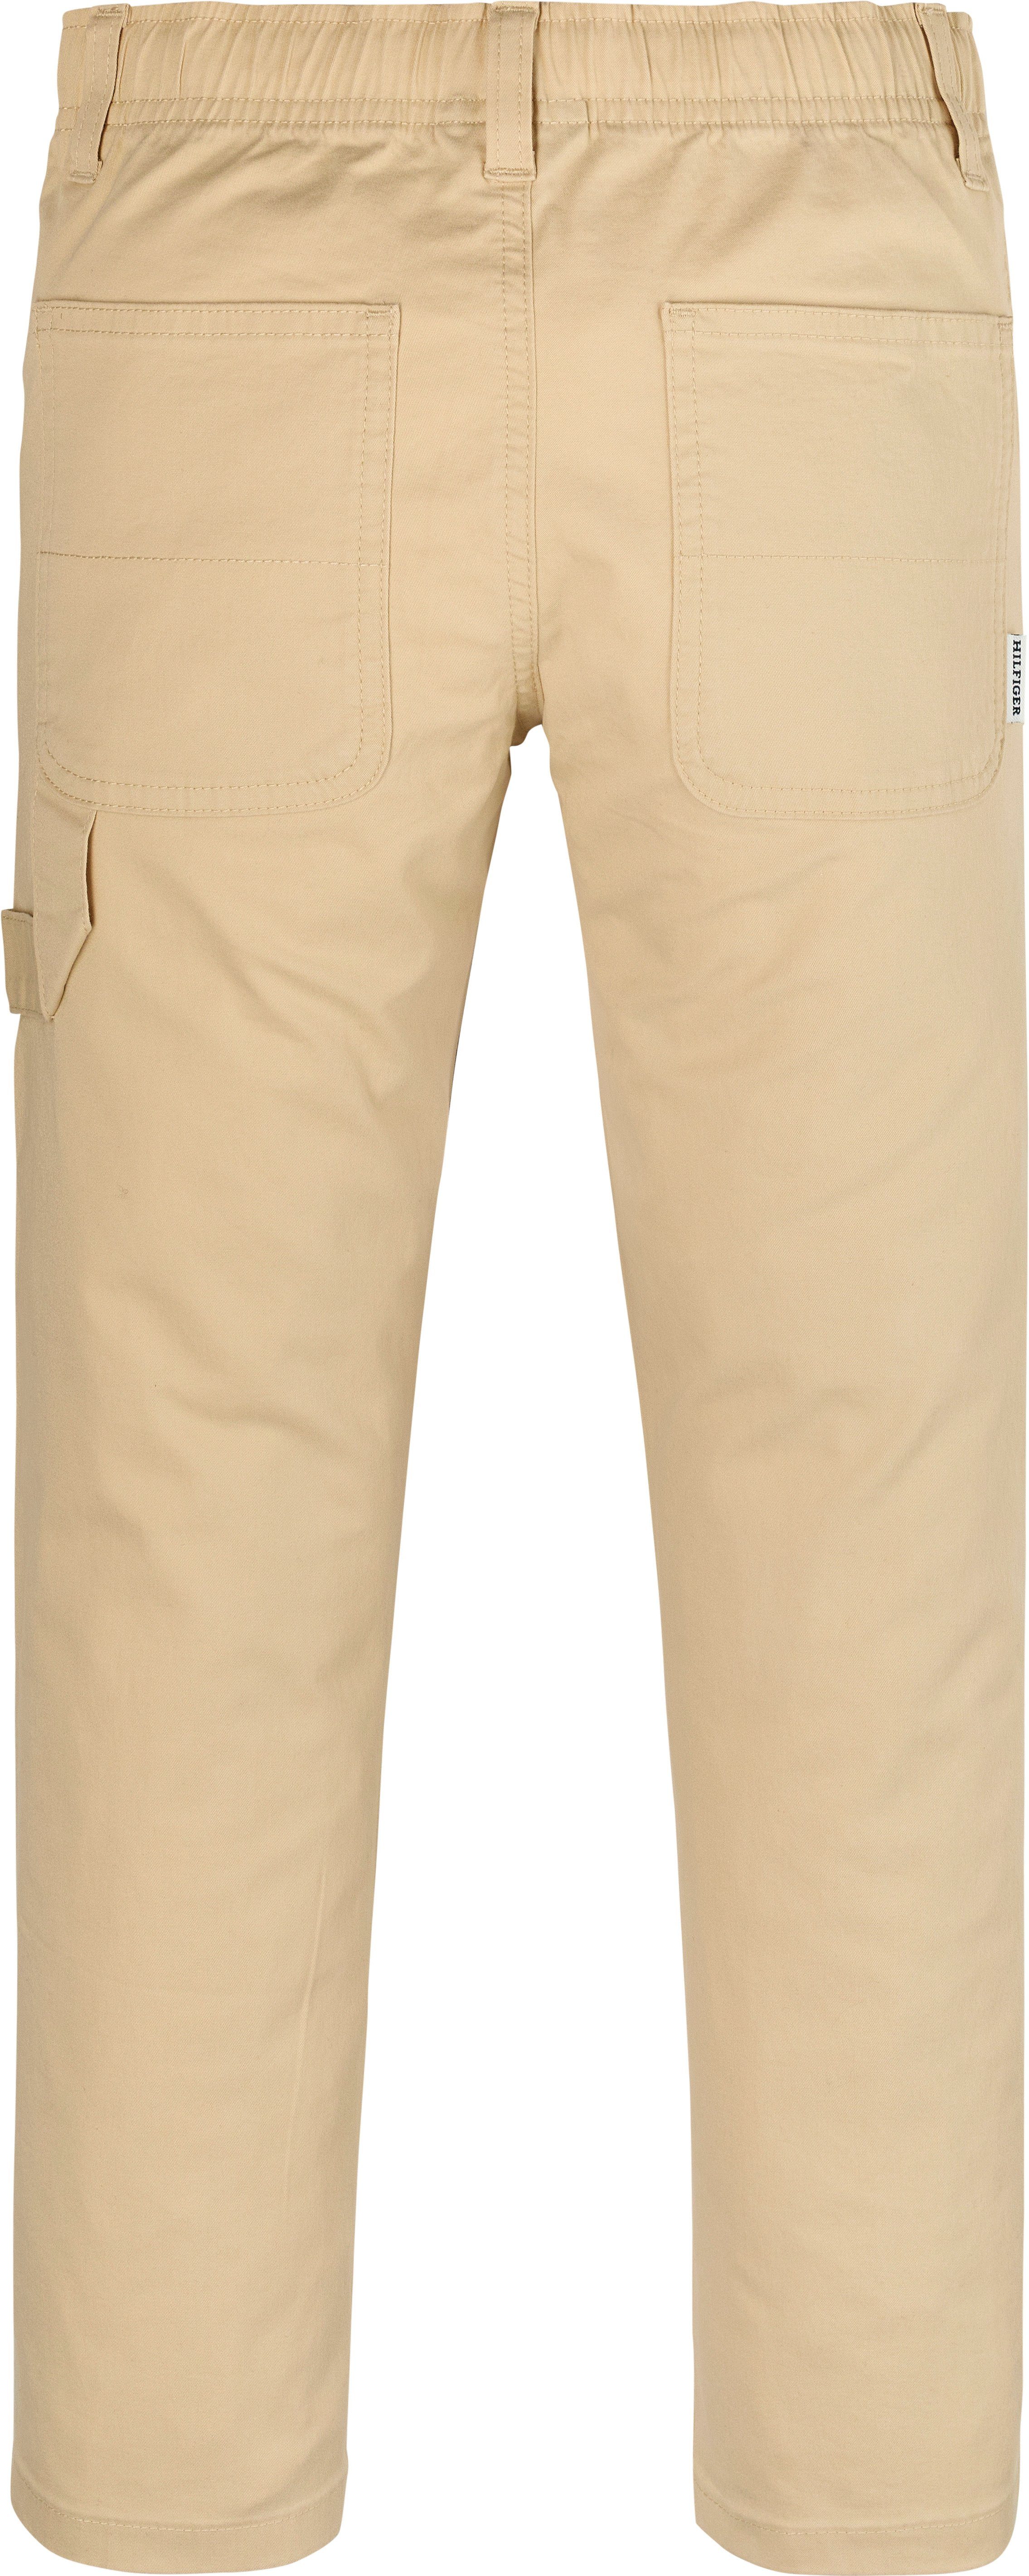 Tommy Hilfiger Webhose Logostickerei SKATER mit WOVEN ON PANTS PULL